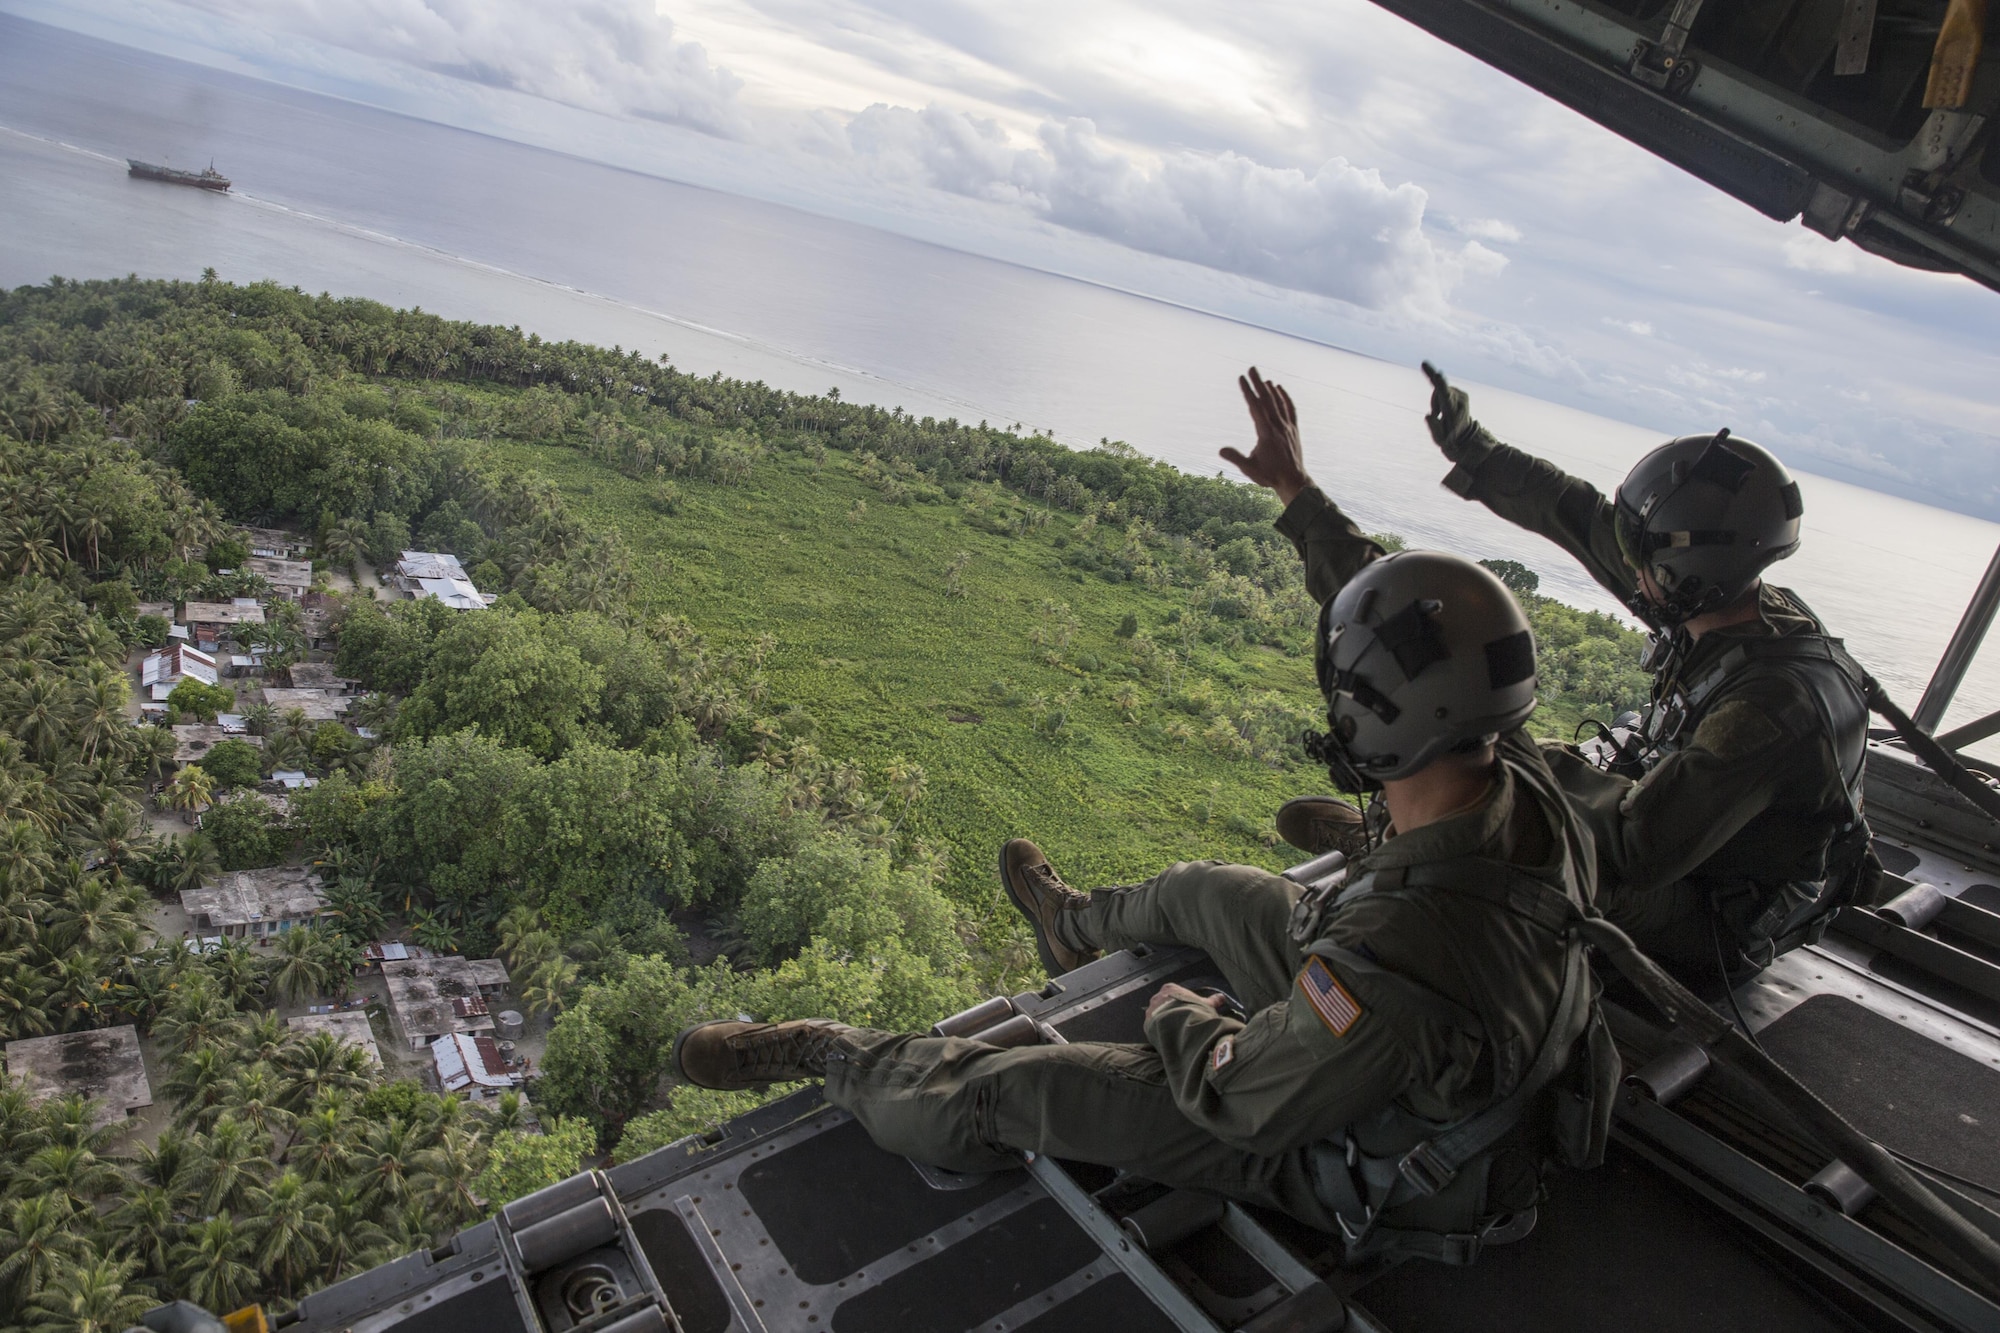 (Right to left) Staff Sgt. Ren Forbes and Airman 1st Class Alexander Lauher, 36th Airlift Squadron loadmasters, wave out the back of a C-130H Hercules to the people of the Namoluk Island, Federated States of Micronesia, Dec. 9, 2015, during Operation Christmas Drop. Every December, C-130H Hercules aircrews from Yokota head to Andersen Air Force Base to execute low-cost, low-altitude humanitarian airdrops to islanders throughout the Commonwealth of the Northern Marianas, Federated States of Micronesia, Republic of Palau. These islands are some of the most remote locations on the globe spanning a distance nearly as broad as the continental U.S. It is the longest-running Department of Defense humanitarian airdrop operation with 2015 being the first trilateral execution with support from Japan Air Self-Defense Force and Royal Australian Air Force. (U.S. Air Force photo by Osakabe Yasuo/Released)